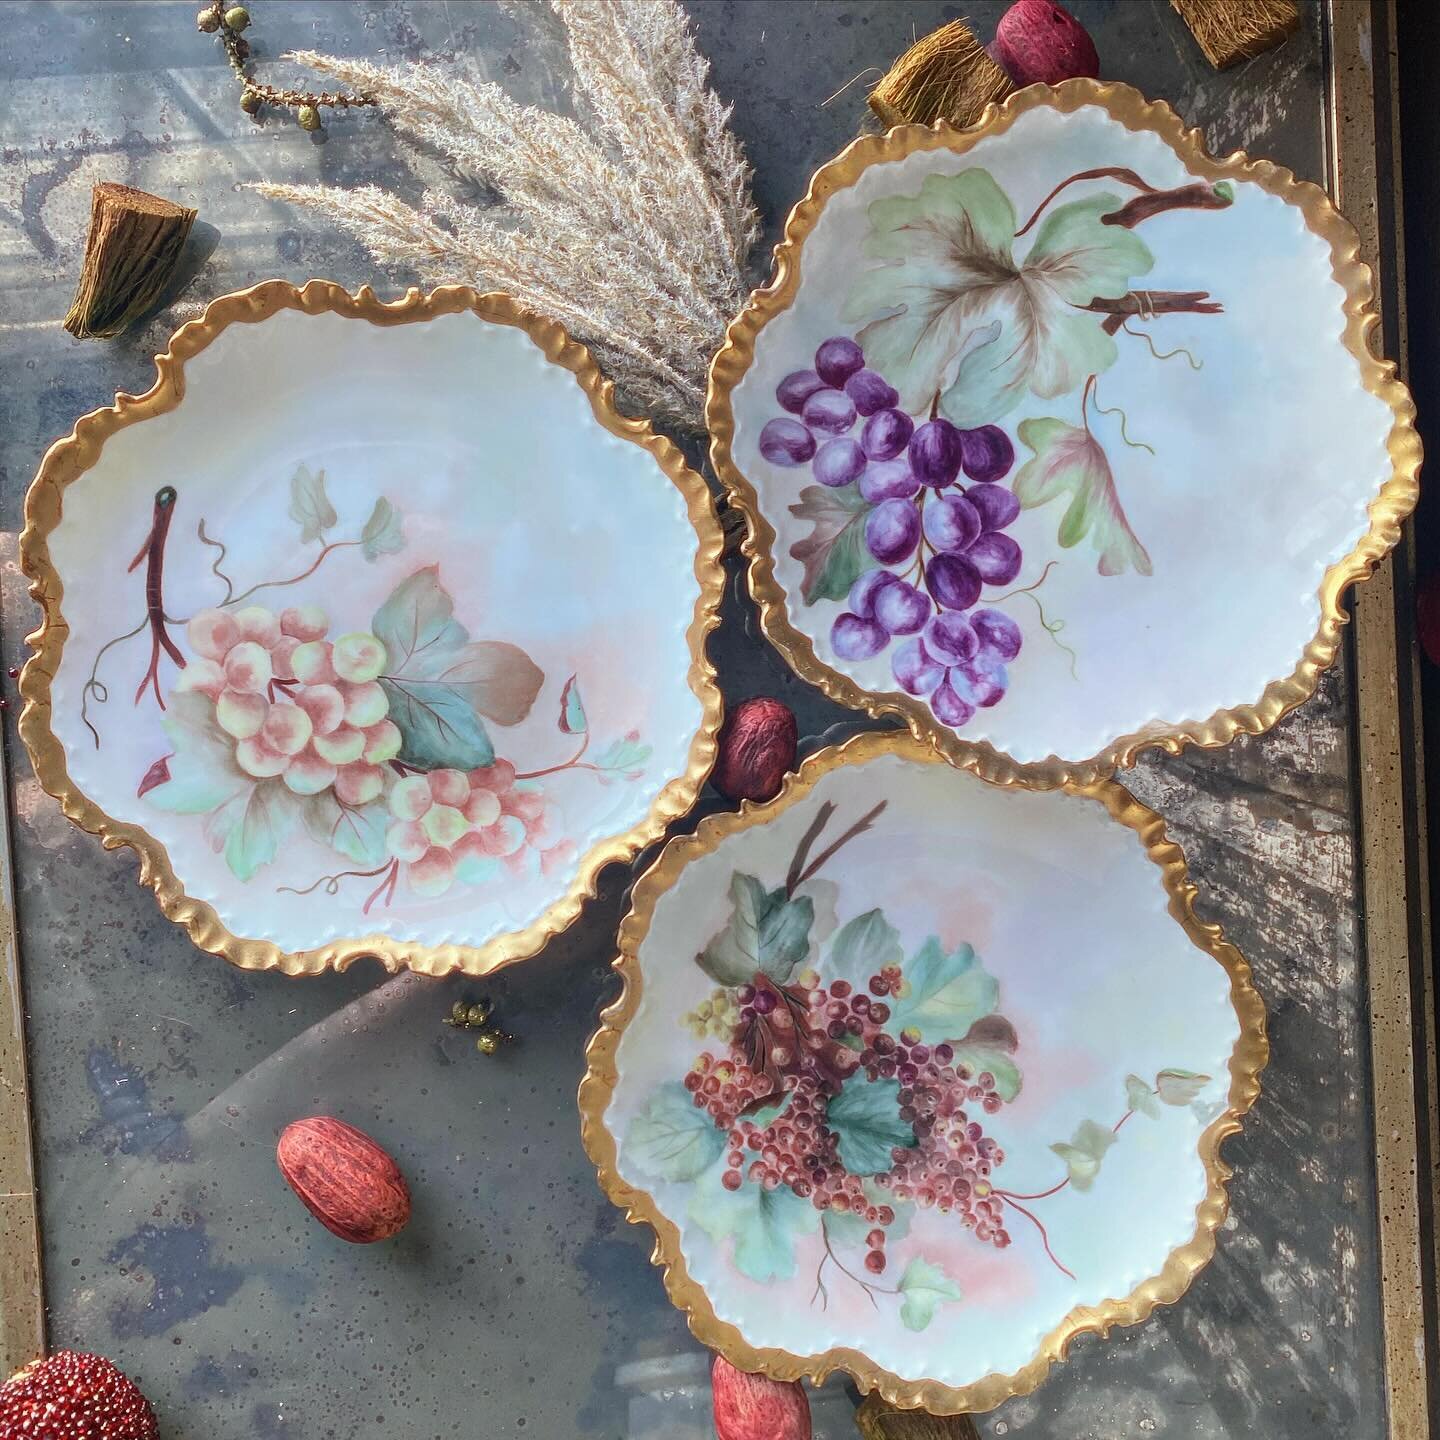 🌟 Day 2 of the #sellmorewithvendoo challenge 🌟

Today&rsquo;s listing is a continuation of the Rosenthal porcelain. I have 3 more of these stunning antique dessert plates from the Monbijou line, featuring meticulously hand-painted bunches of grapes